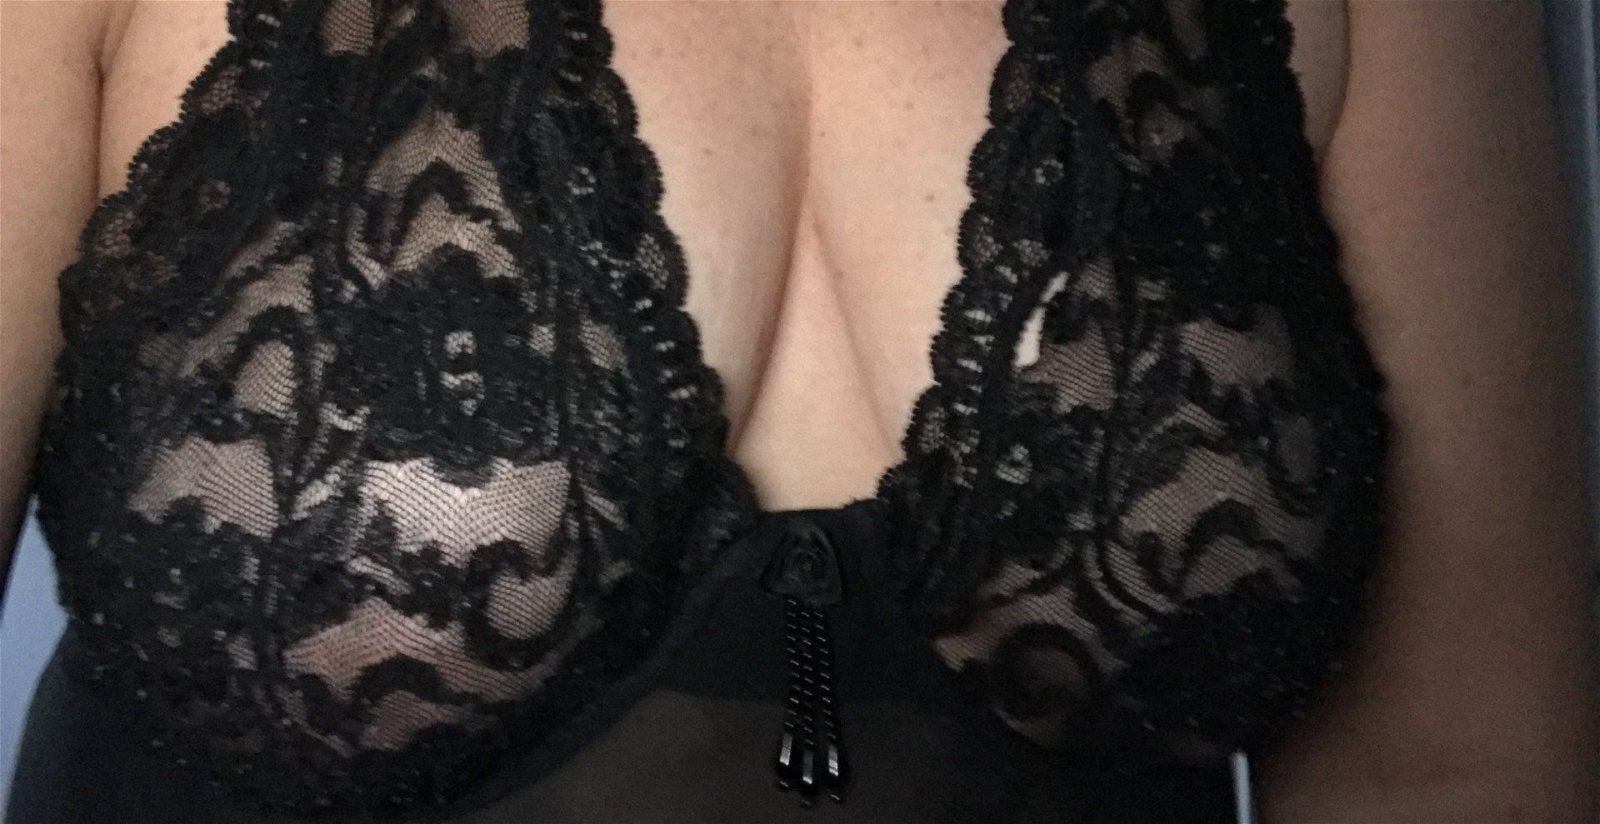 Cover photo of Momsnaughtyhobby69